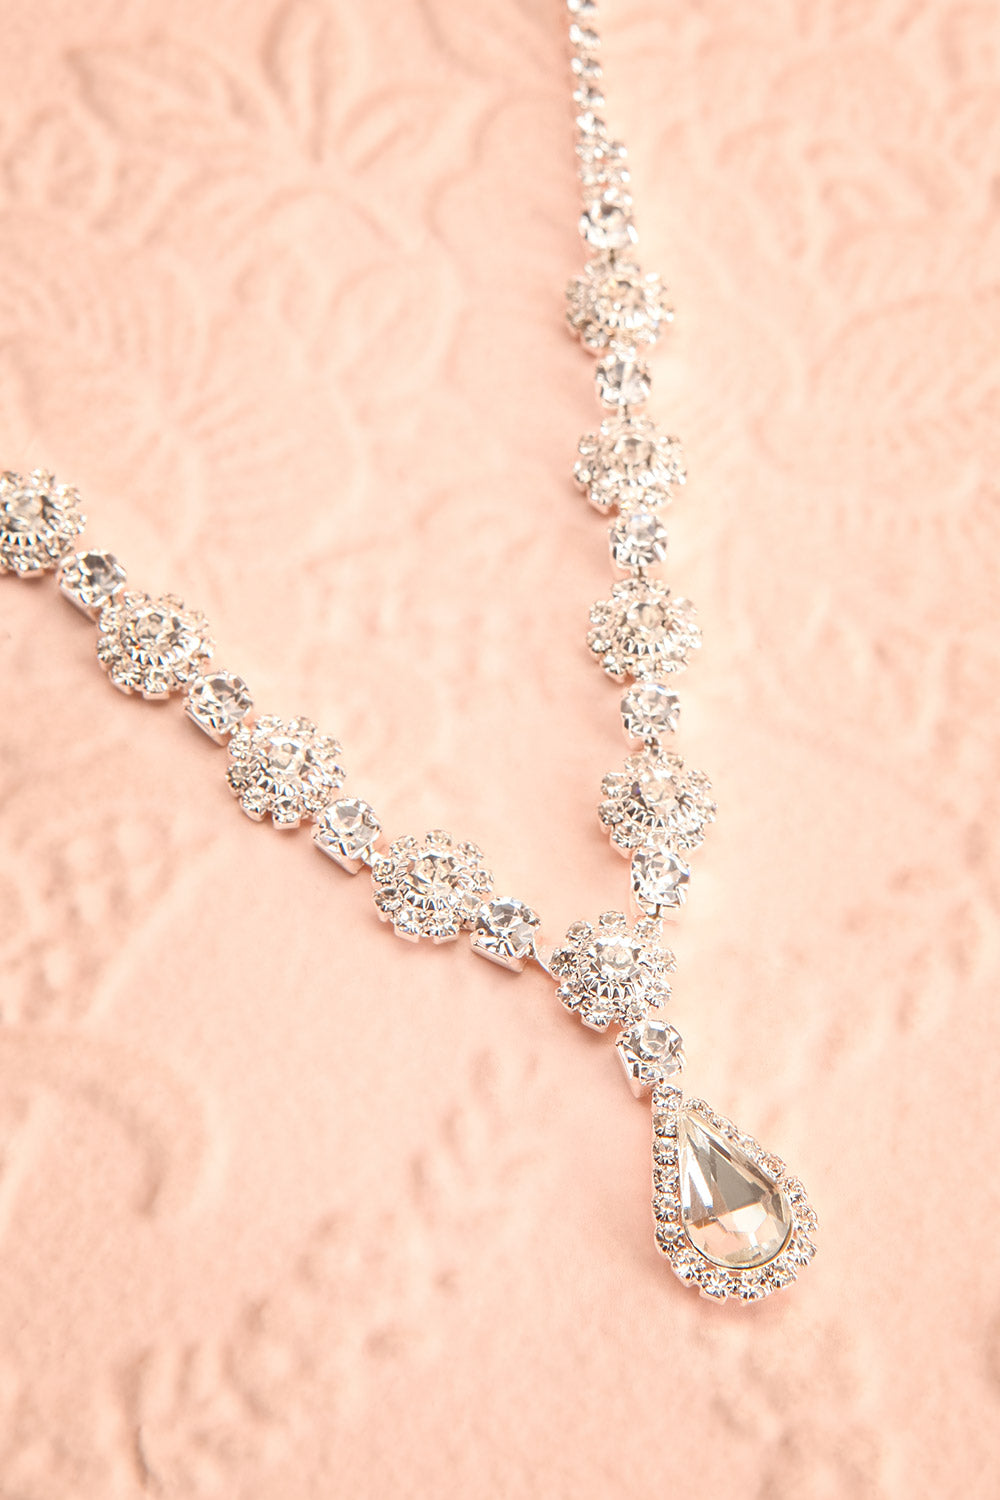 Radelle Silver Necklace w/ Crystal Pendant | Boutique 1861 flat view